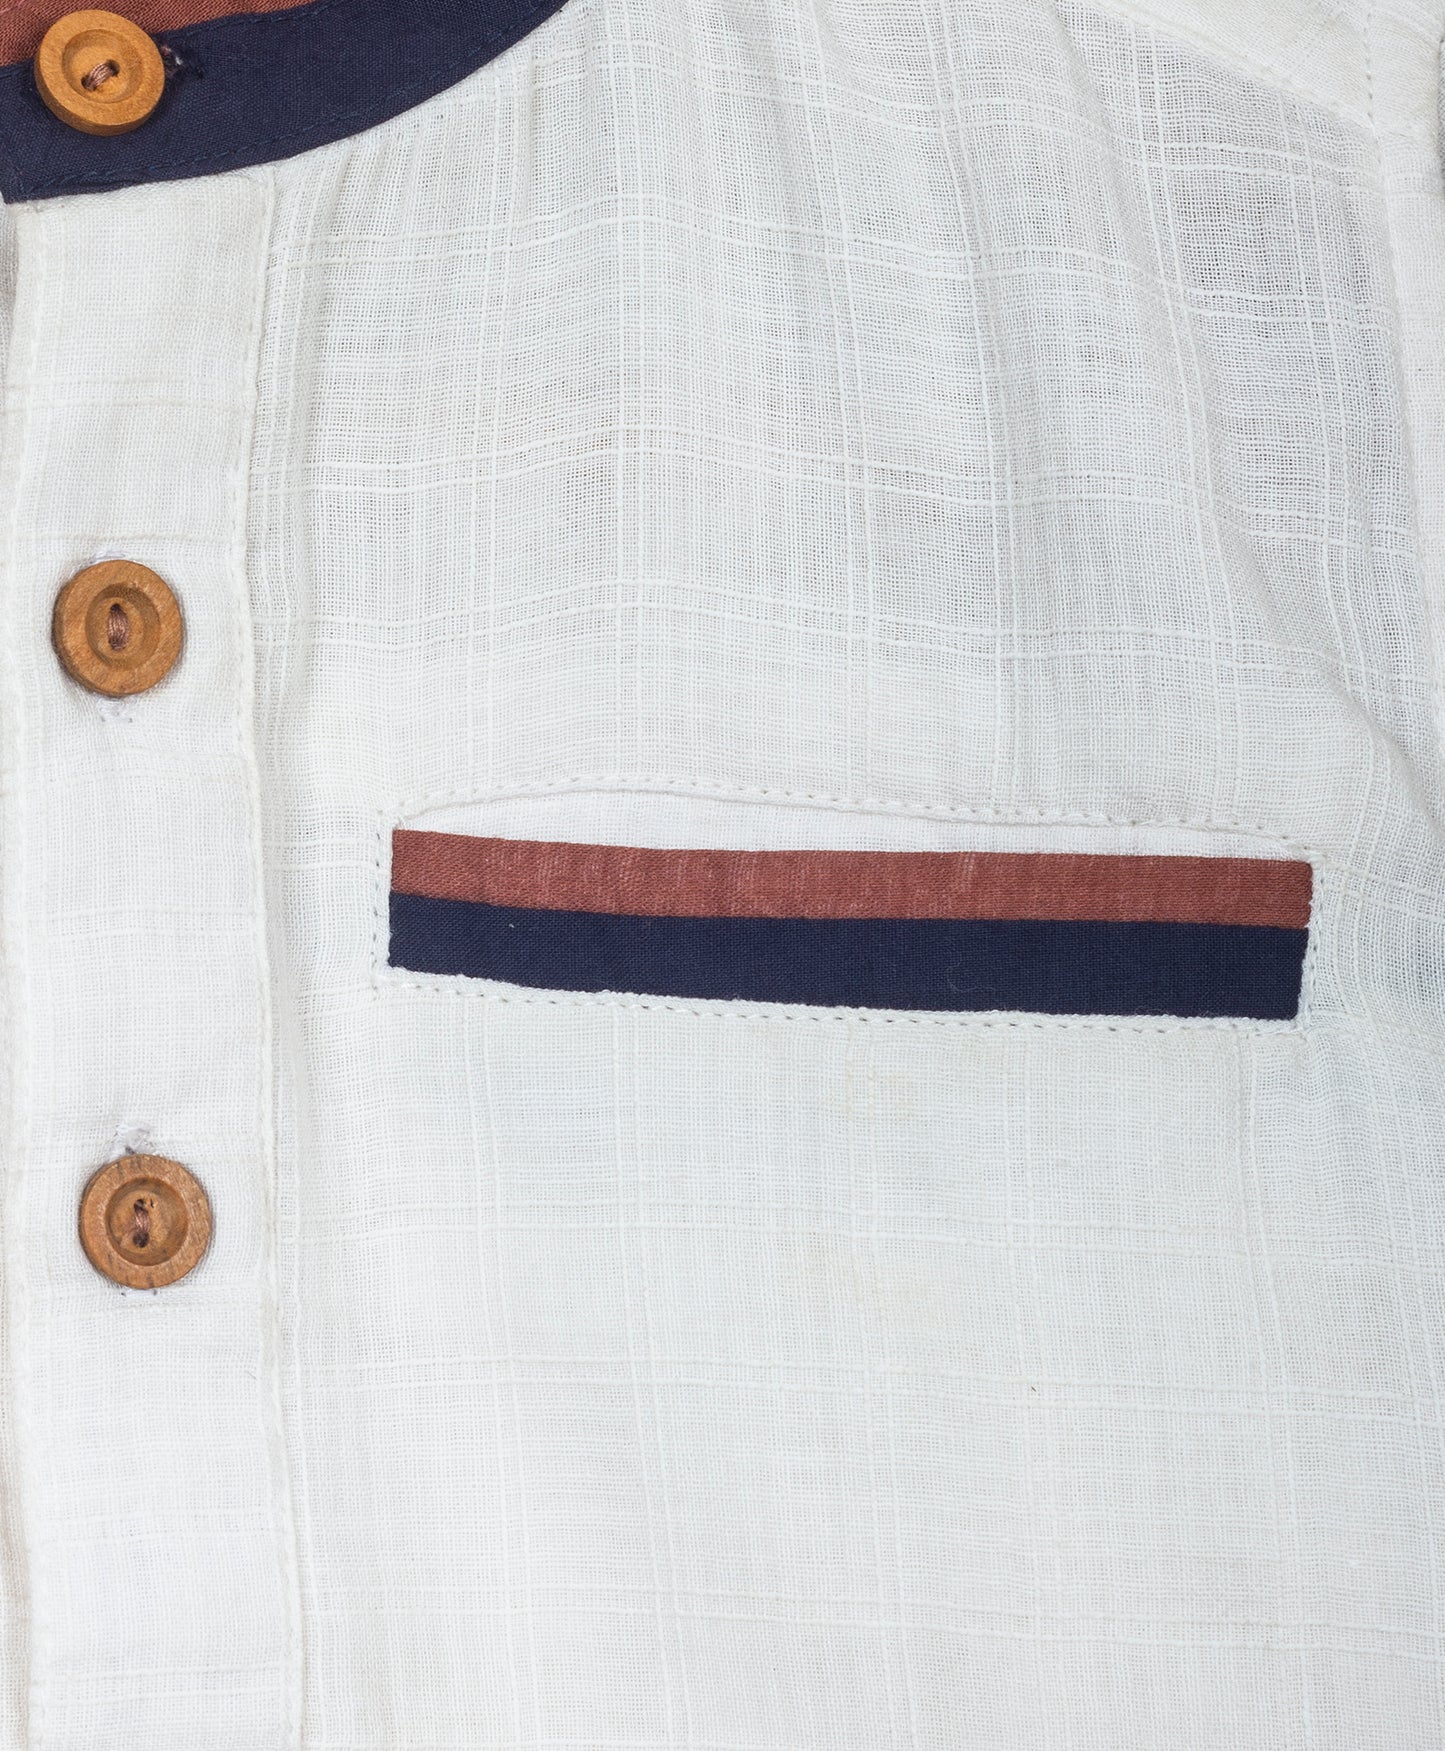 White slub cotton shirt with contrast collars and pocket detailing